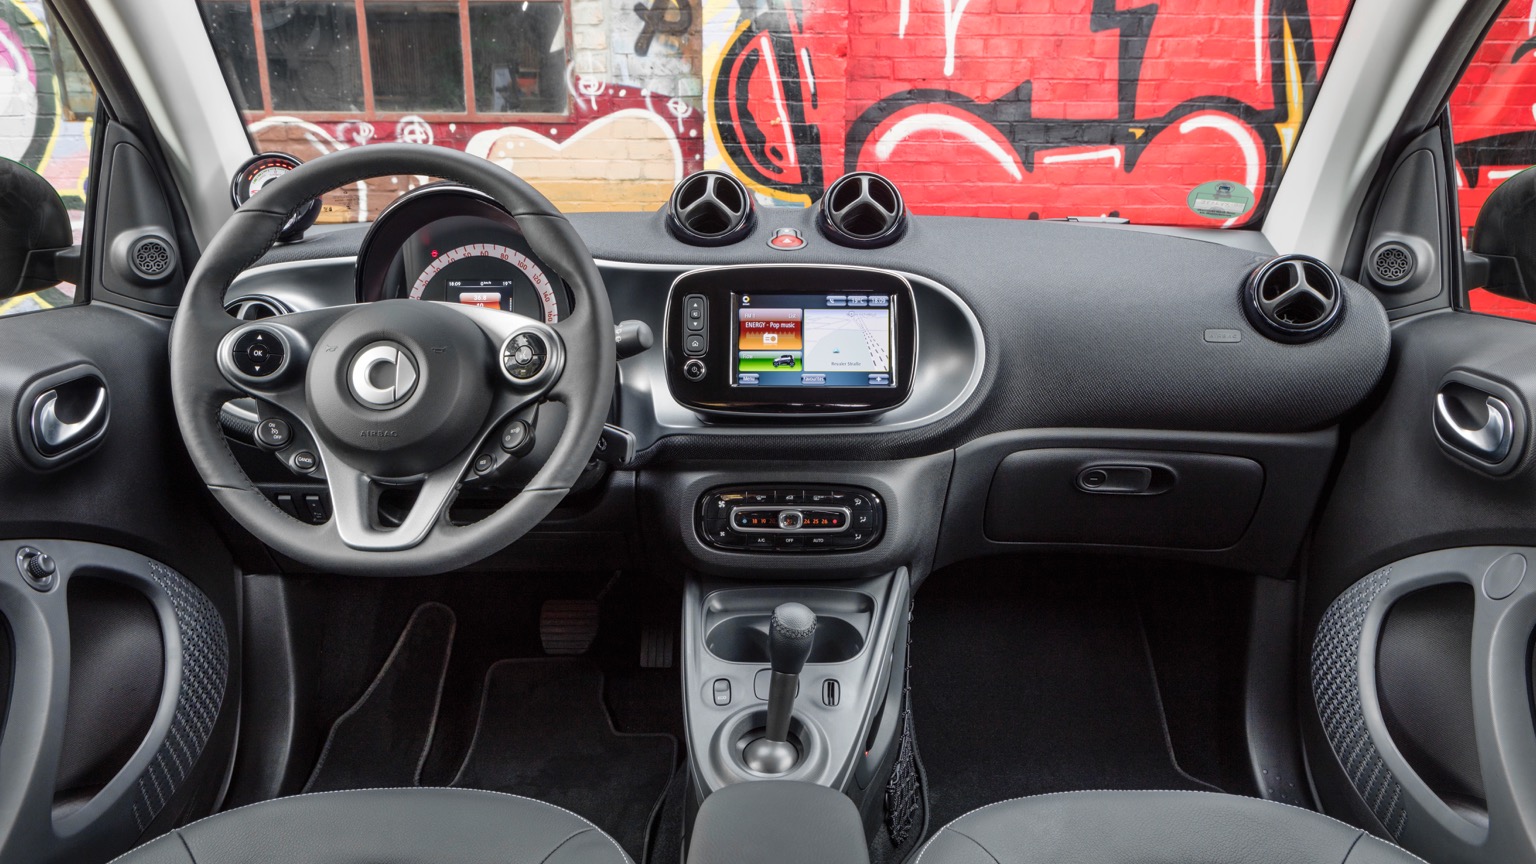 Smart_fortwo-15